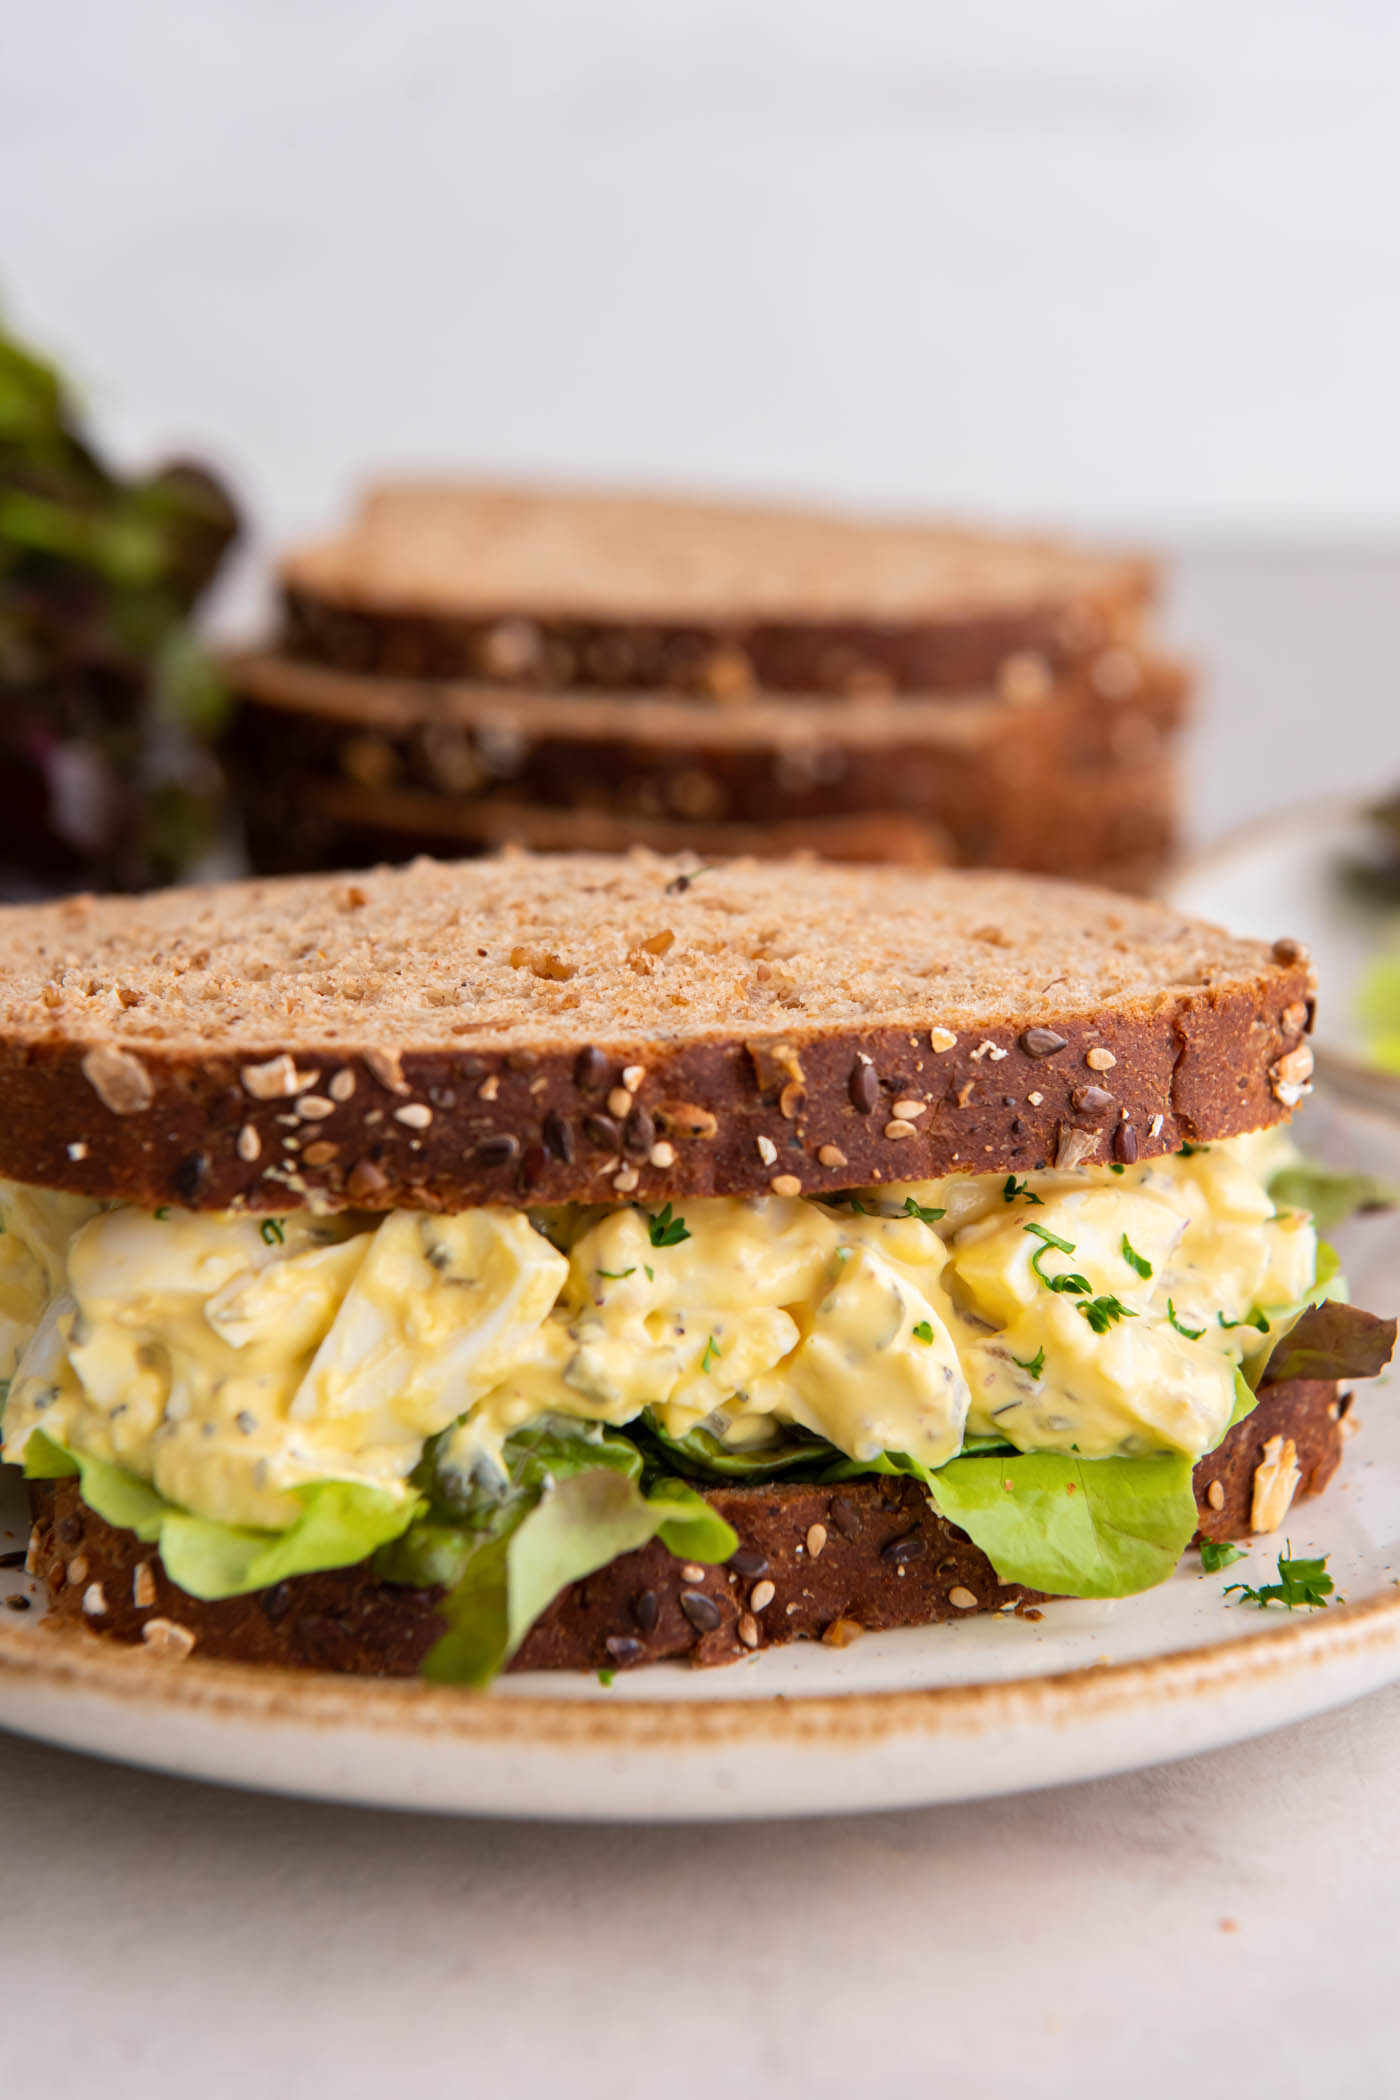 Egg salad sandwich on whole wheat bread with lettuce.